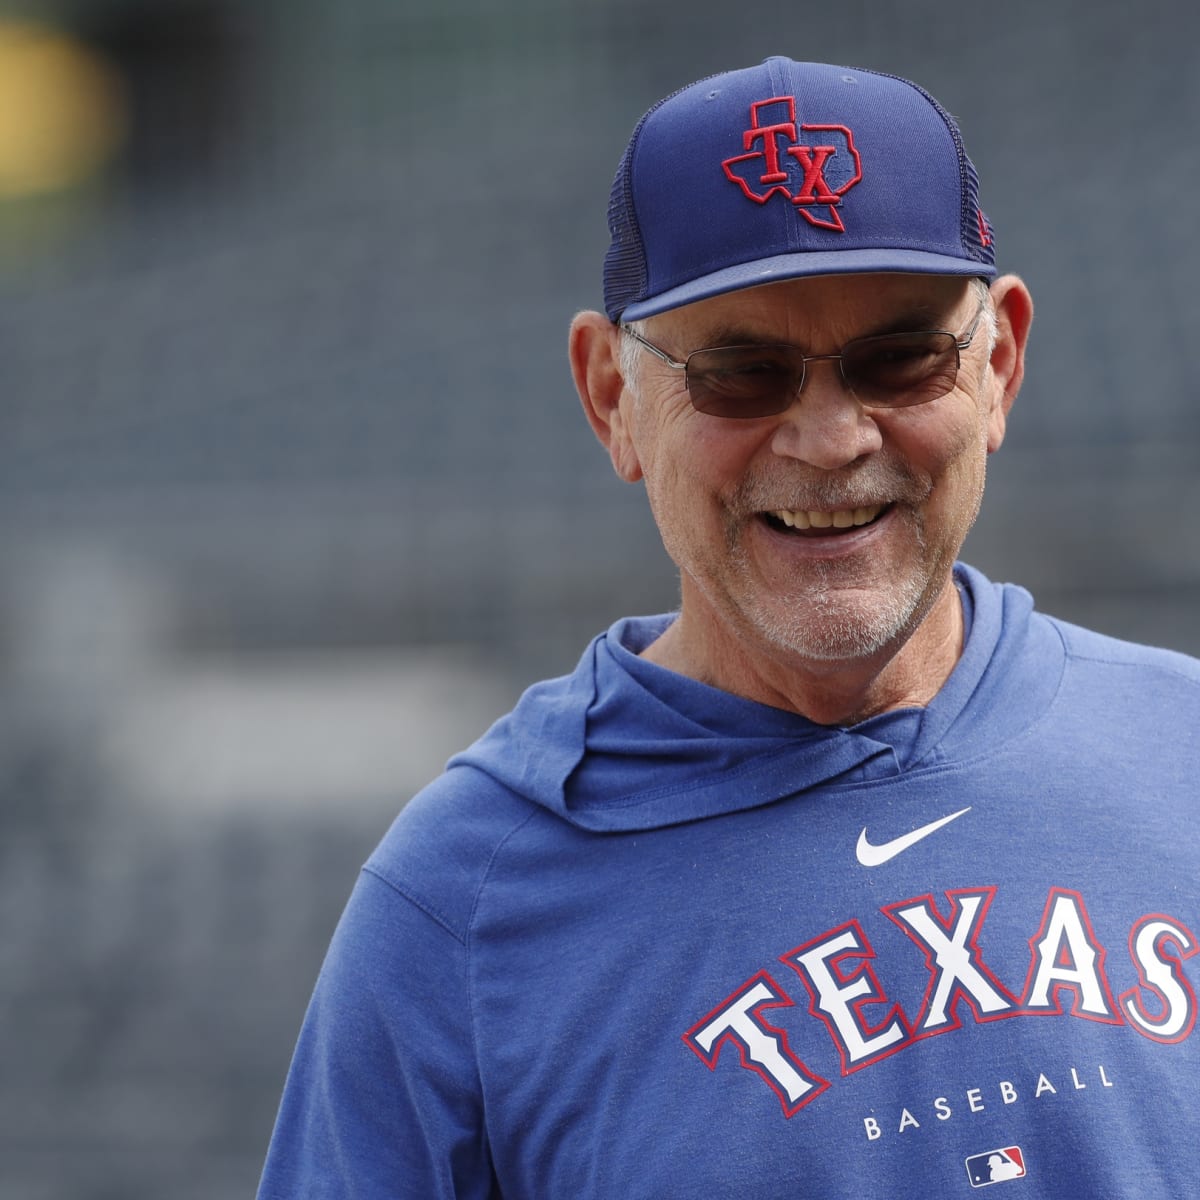 Bruce Bochy returns to San Francisco to face former club, Rangers